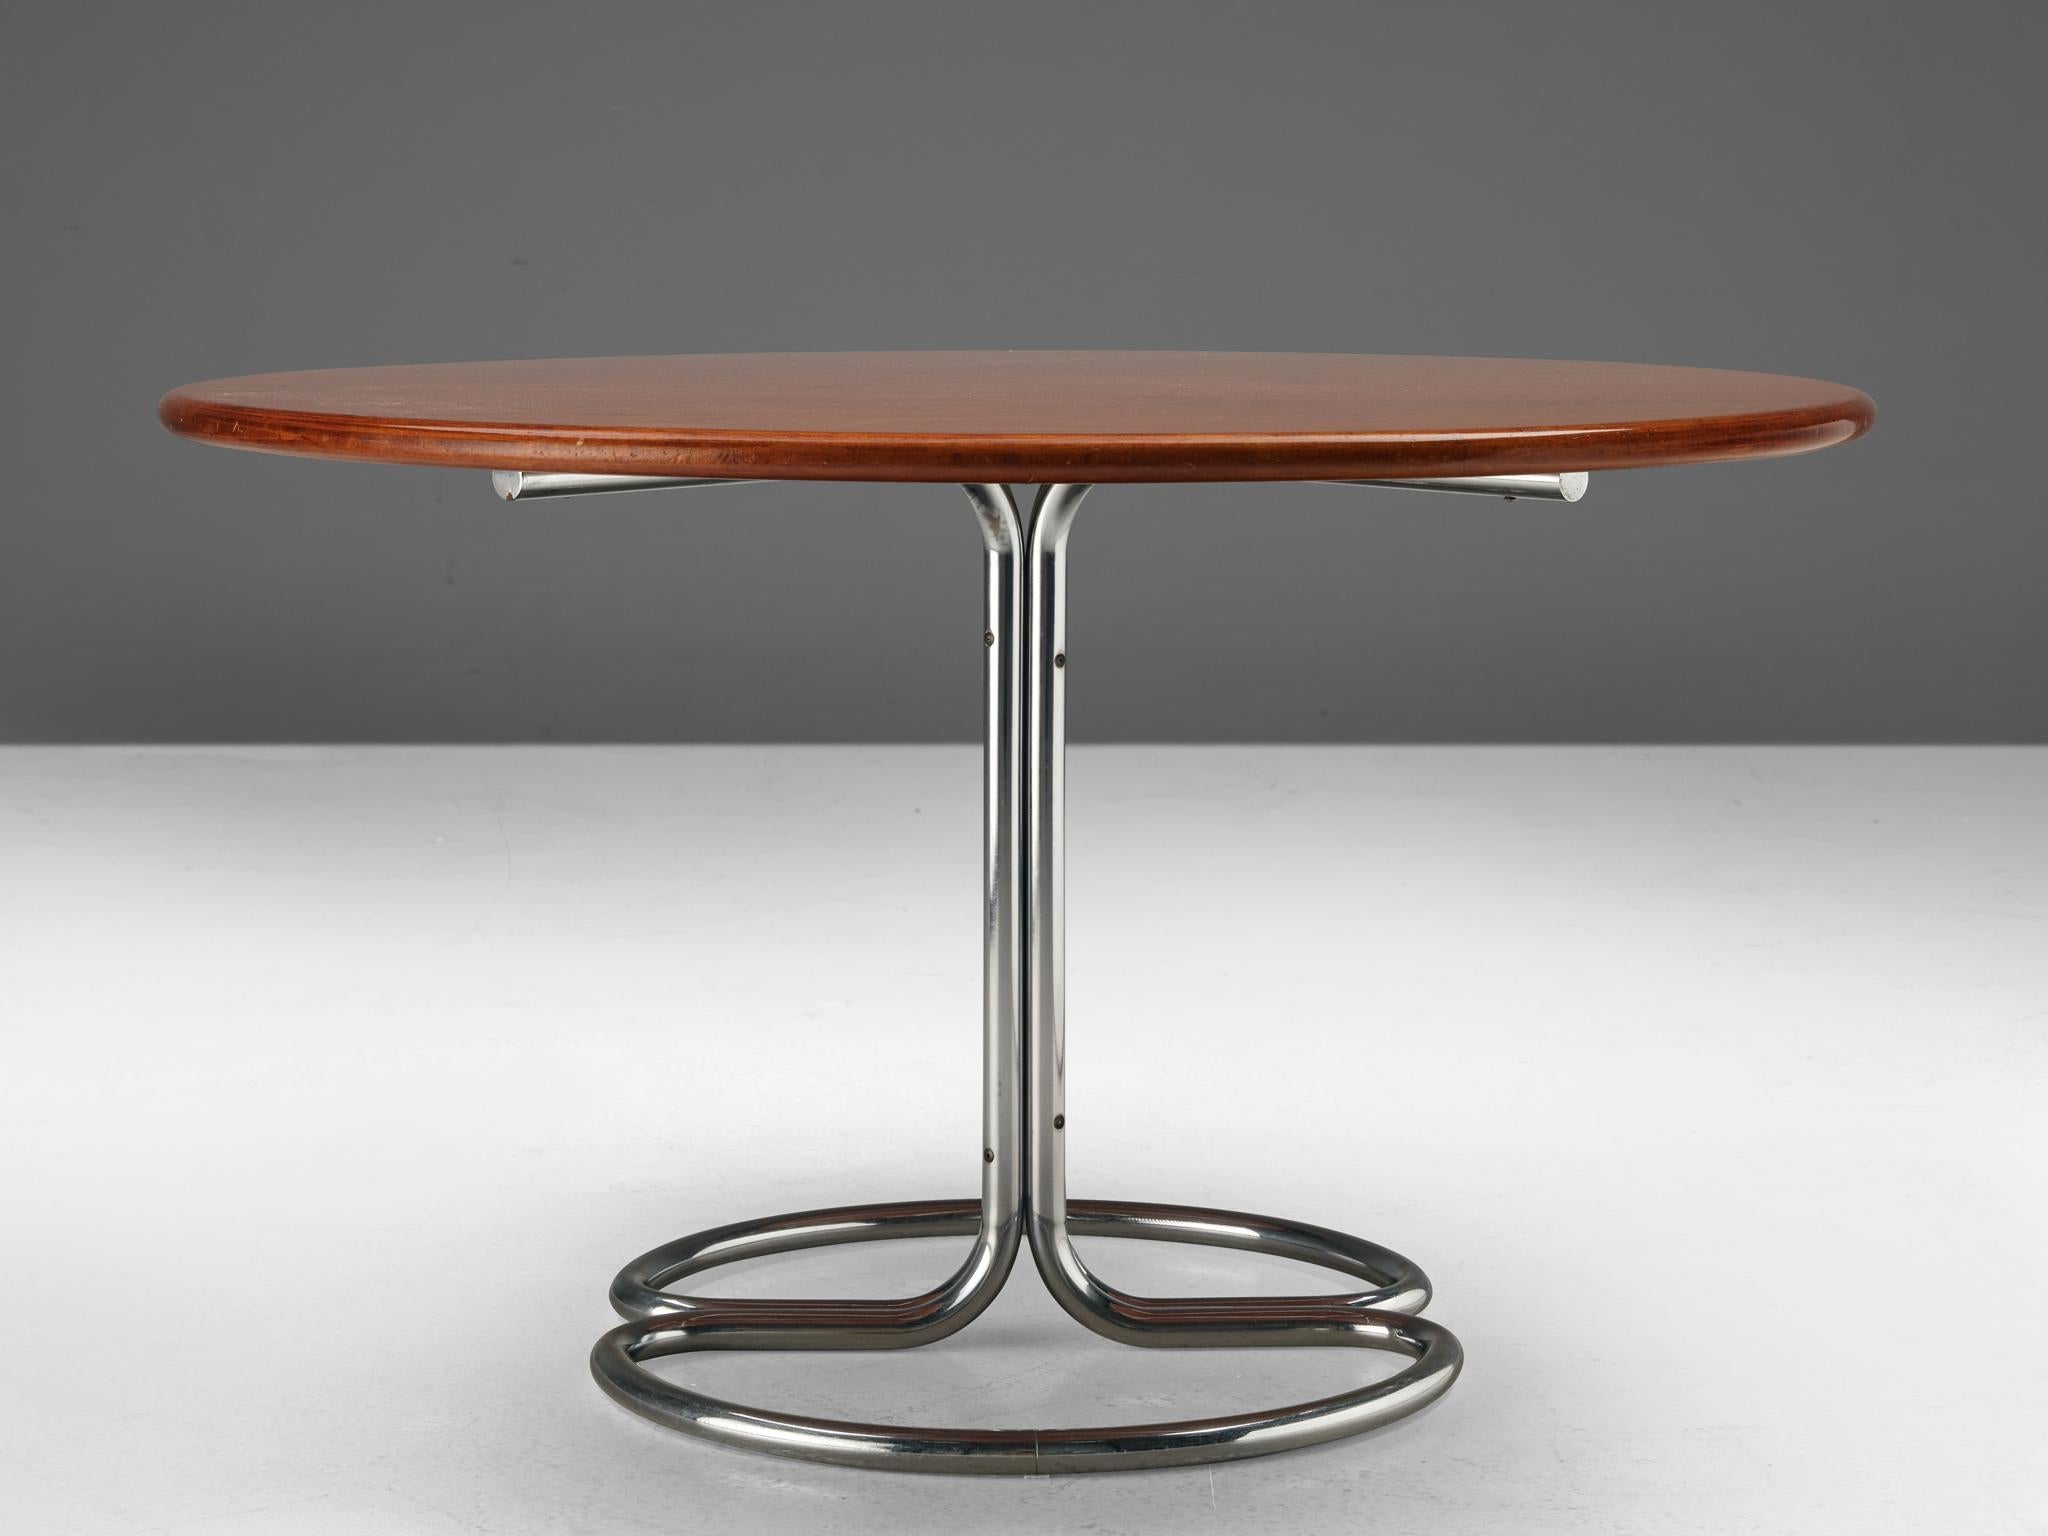 Giotto Stoppino for Bernini Round Dining Table 'Maia' in Walnut and Metal